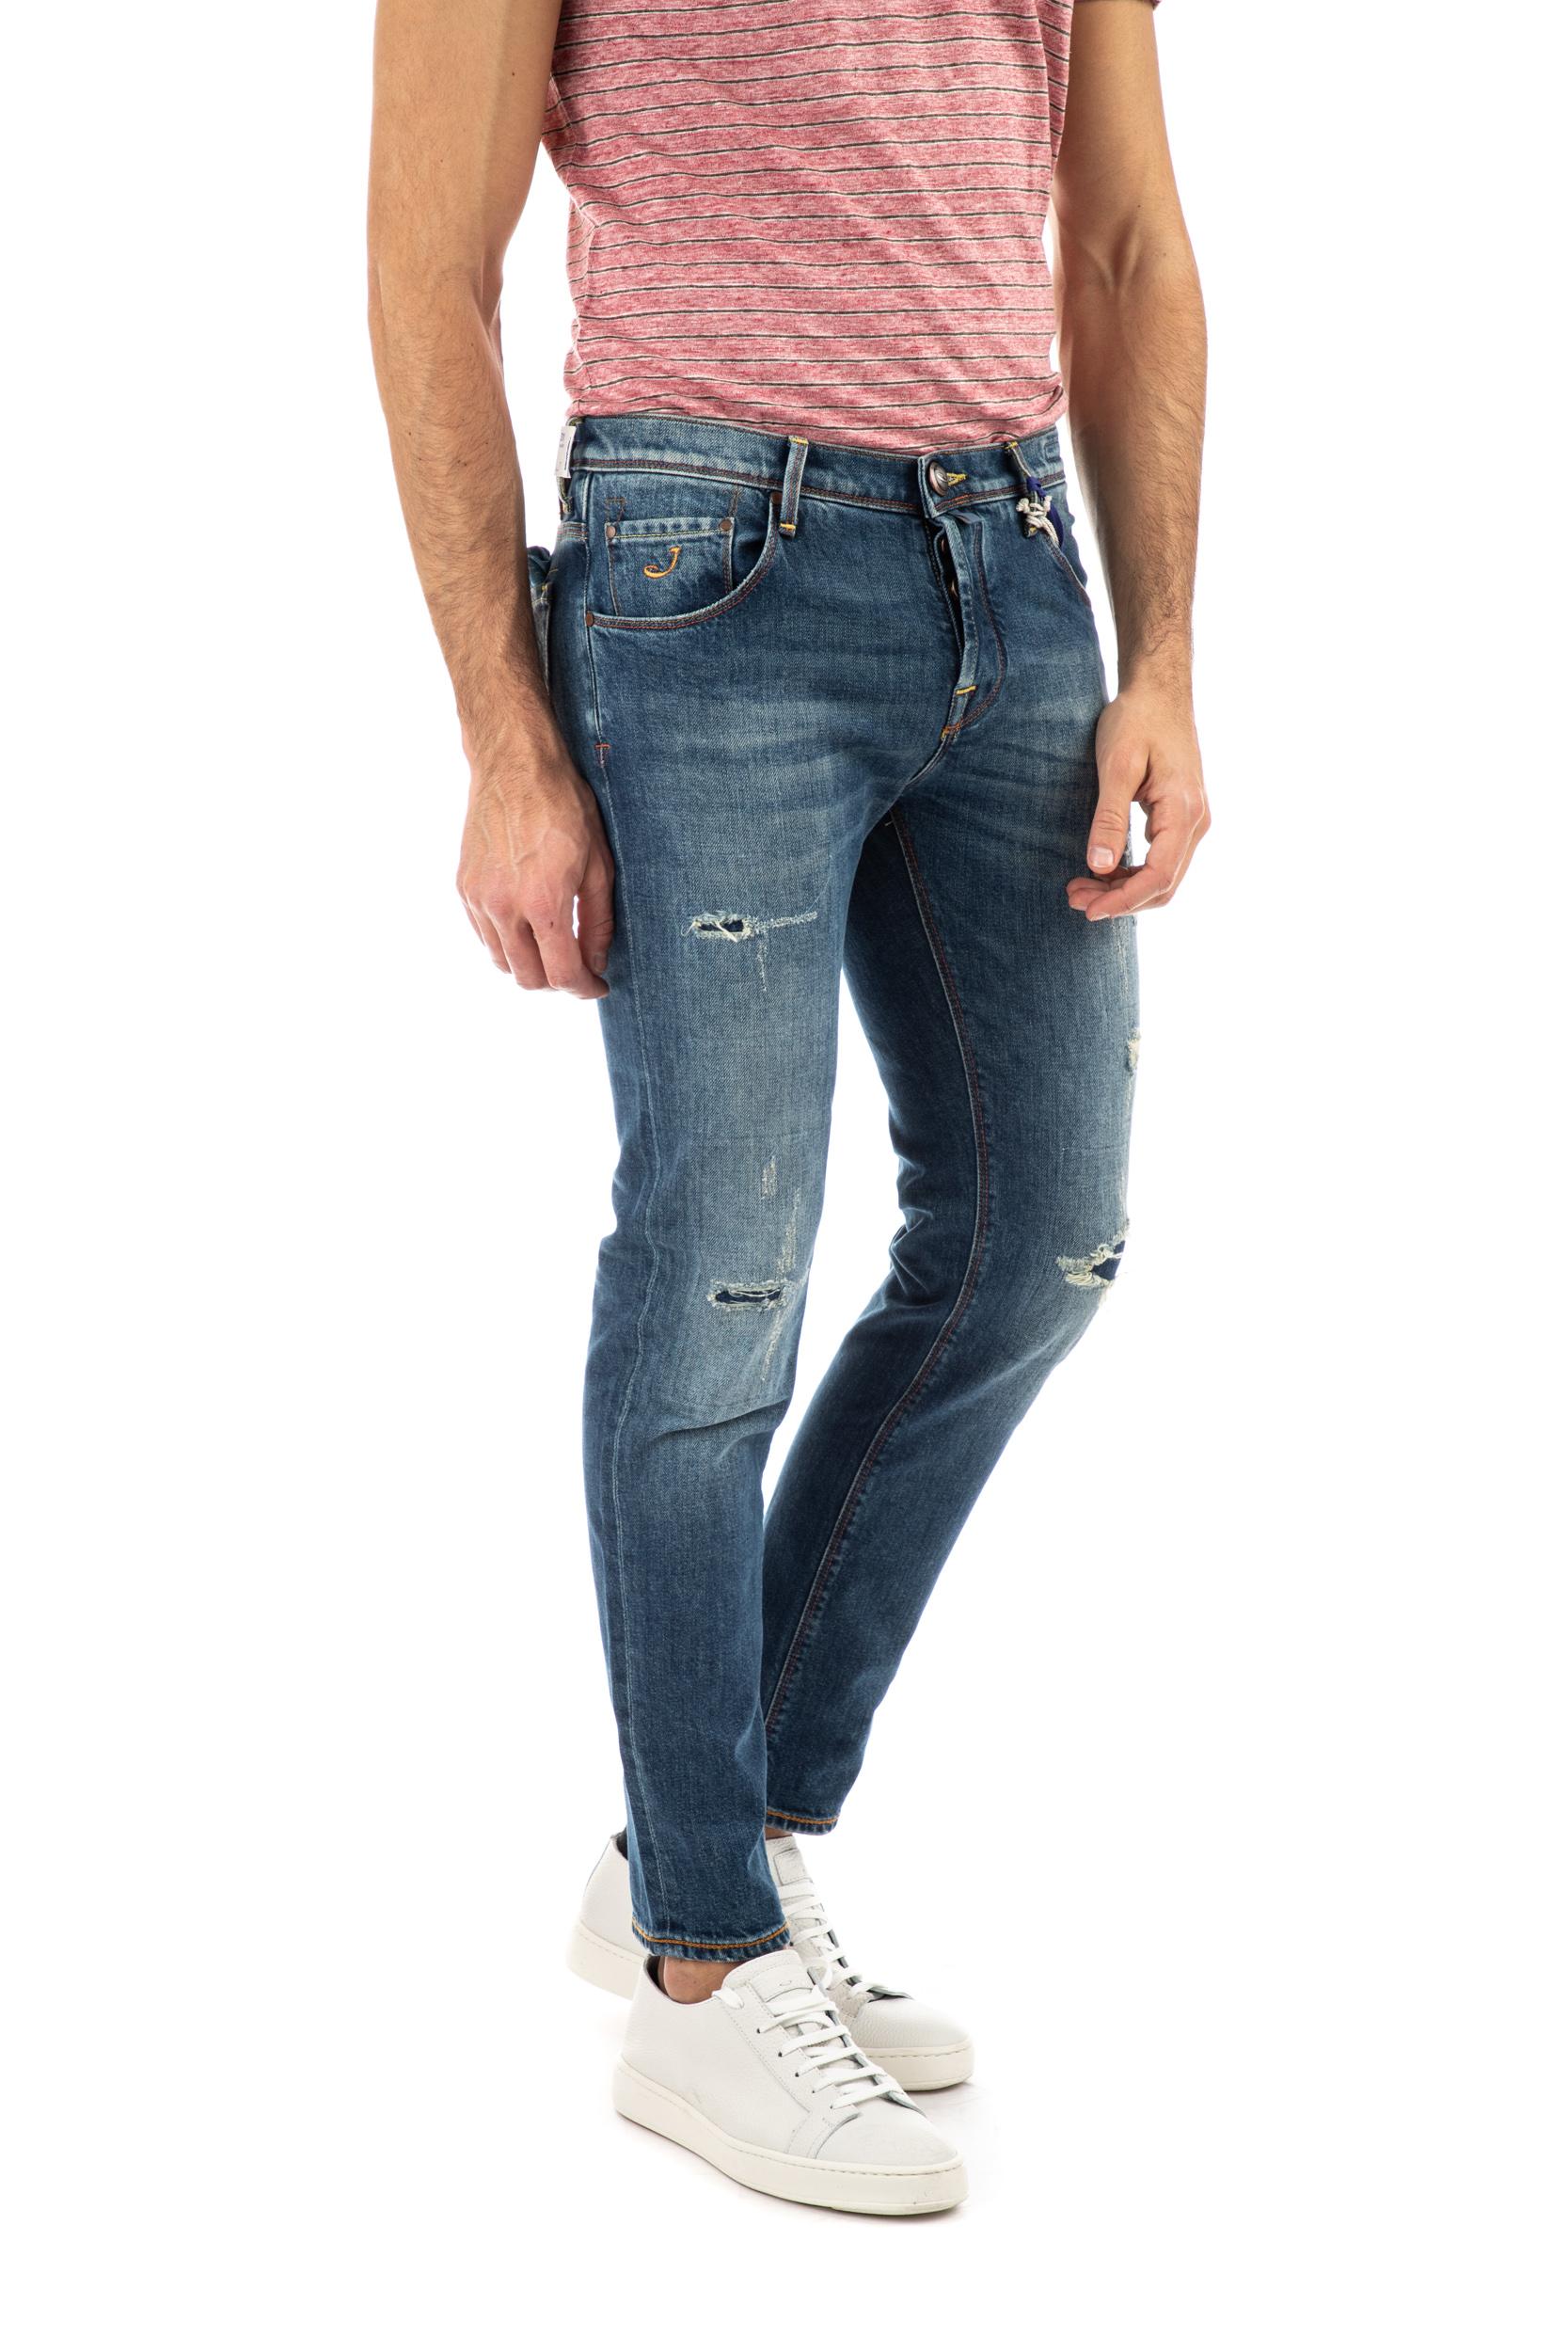 thing steel Teasing Jacob cohen Jeans special edition with rips j682 fit, jeans, Denim - Il  Setaccio